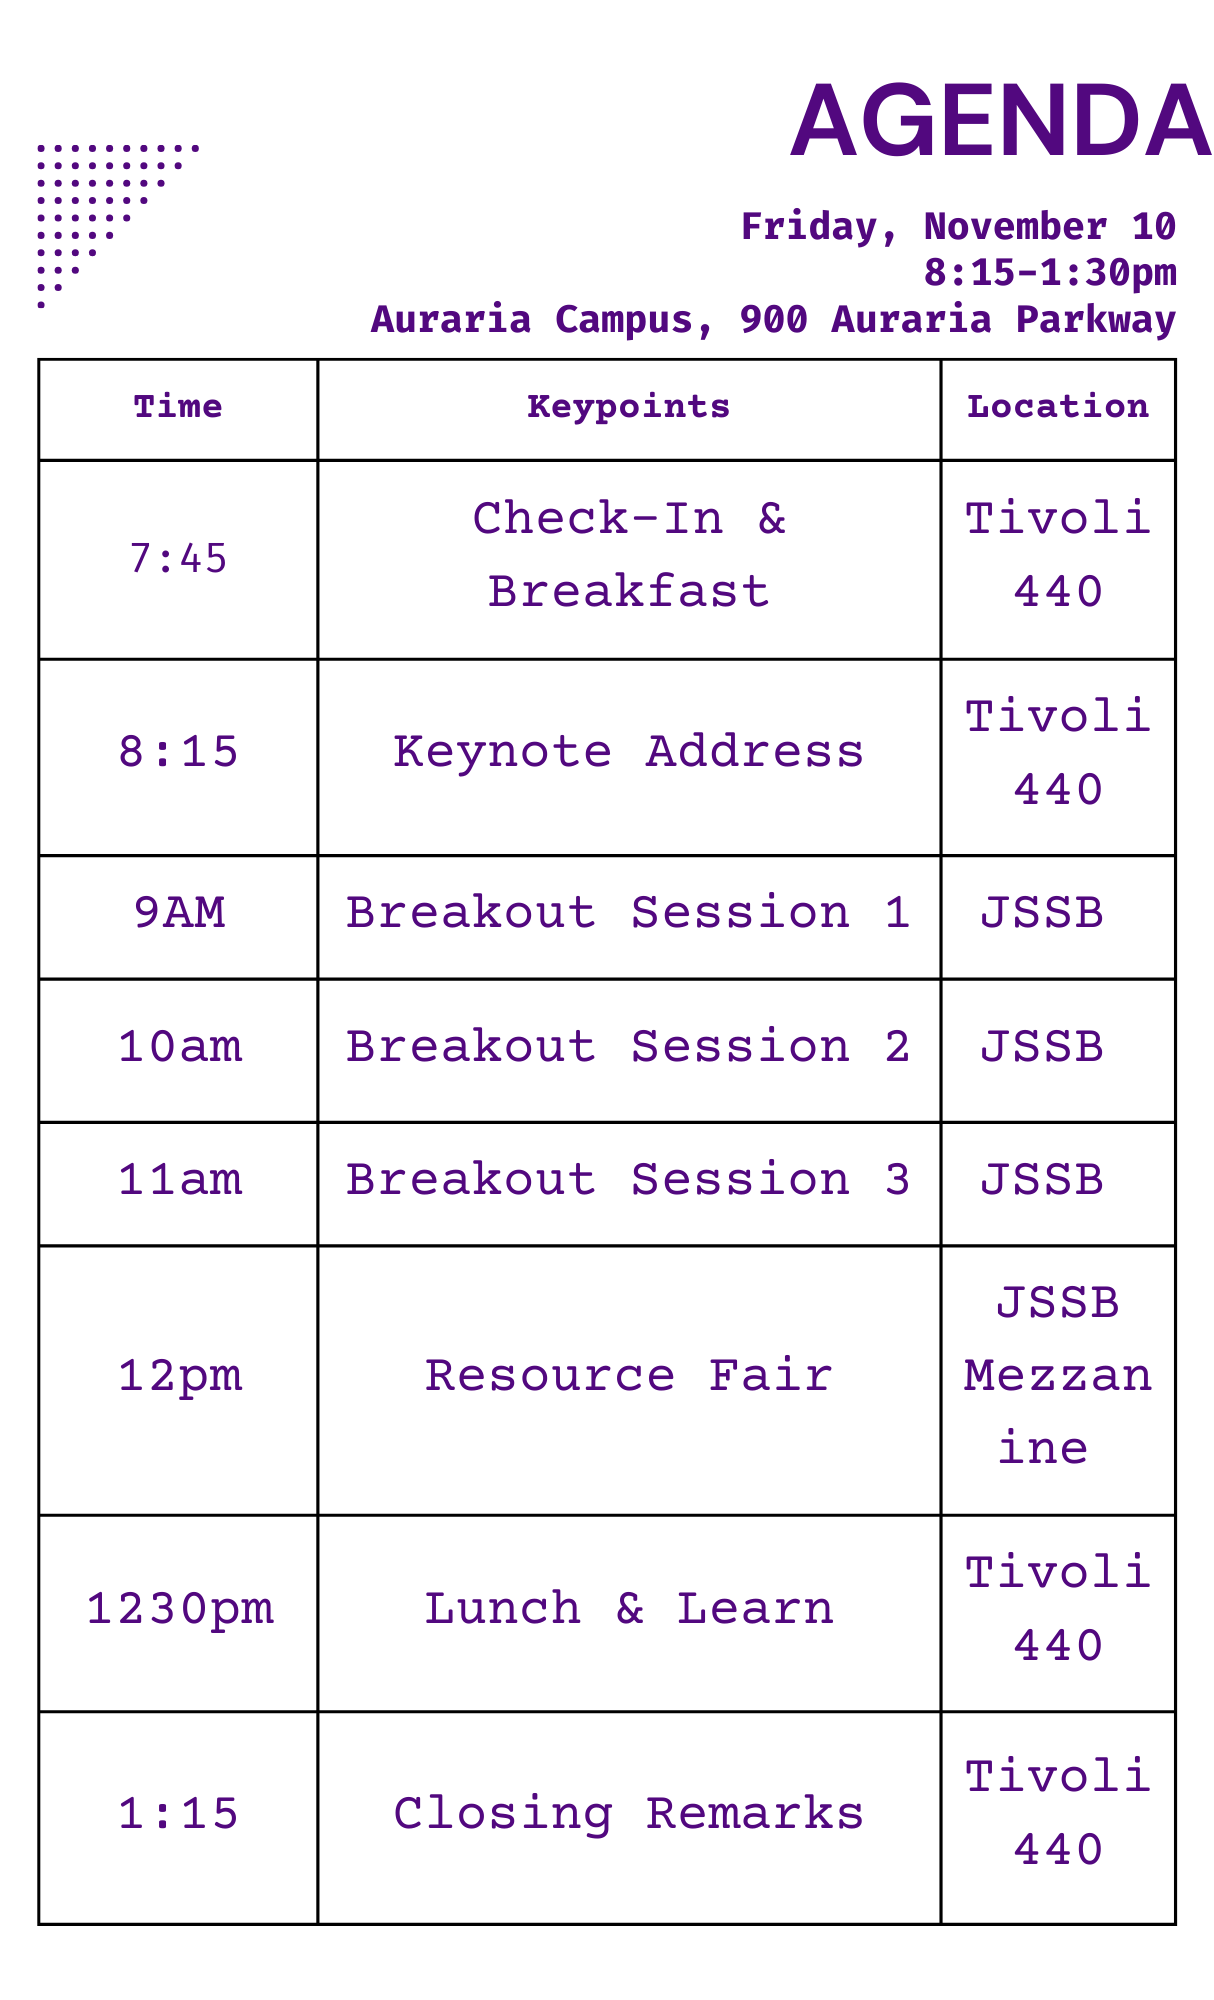 Undocu Resource Day Agenda Friday November 10, 8am to 130pm Starting at Tivoli building room 440 Check in and breakfast at 745am Keynote address at 815am Moving to Jordan Student Success Building Break OUt session 1 at 9am Breakout session 2 at 10am Break out session 2 at 11am Resource Fair 12pm Back at Tivoli 440 Lunch & Learn at 1230 pm Clsoing Remarks at 115pm